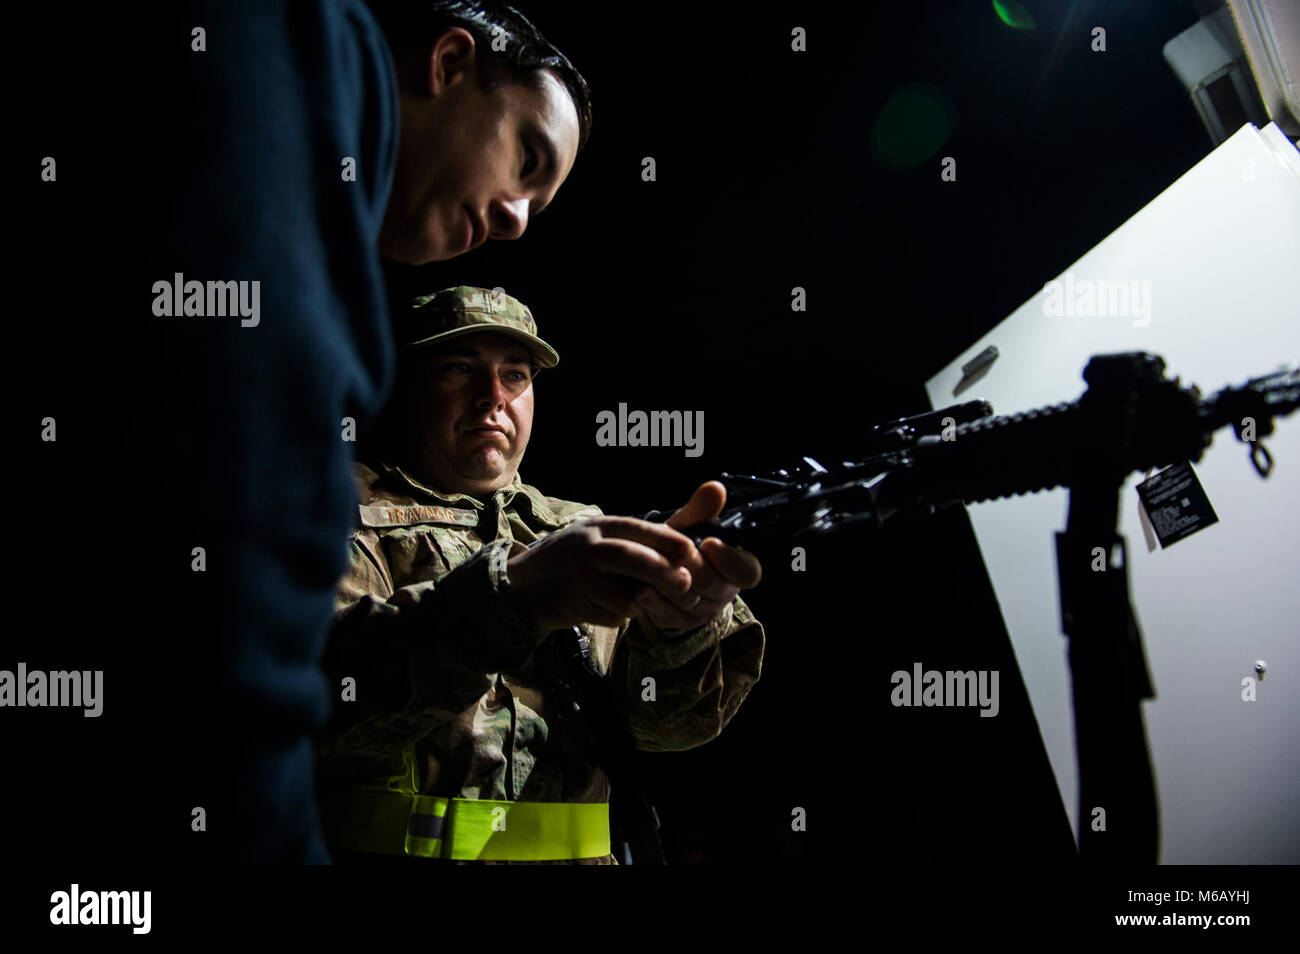 Master Sgt. Burt Traynor, Bravo Flight Chief, 1st Combat Camera Squadron, Joint Base Charleston, South Carolina, clears his weapon before a training mission during Exercise Scorpion Lens 2018, at McCrady Training Center, Eastover, South Carolina, Feb. 12, 2018. Exercise Scorpion Lens is an annual Ability to Survive and Operate training exercise mandated by Air Force Combat Camera job qualification standards. Held at the United States Army Training Center Fort Jackson, S.C., and the McCrady Training Center, Eastover, S.C., the exercise's purpose is to provide refresher training to combat camera Stock Photo